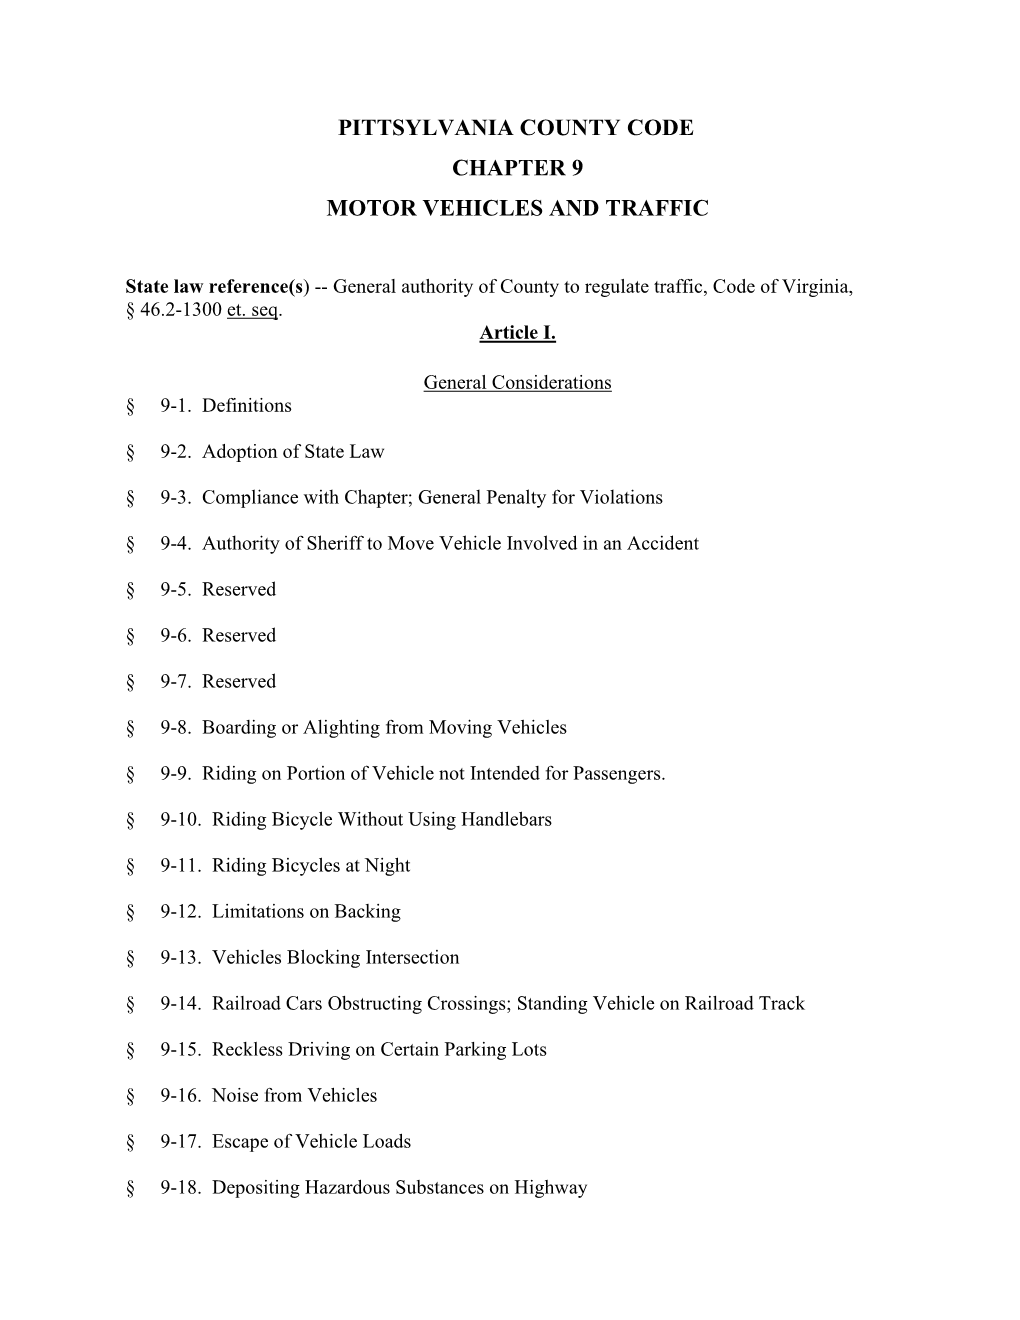 Chapter 9 Motor Vehicles and Traffic